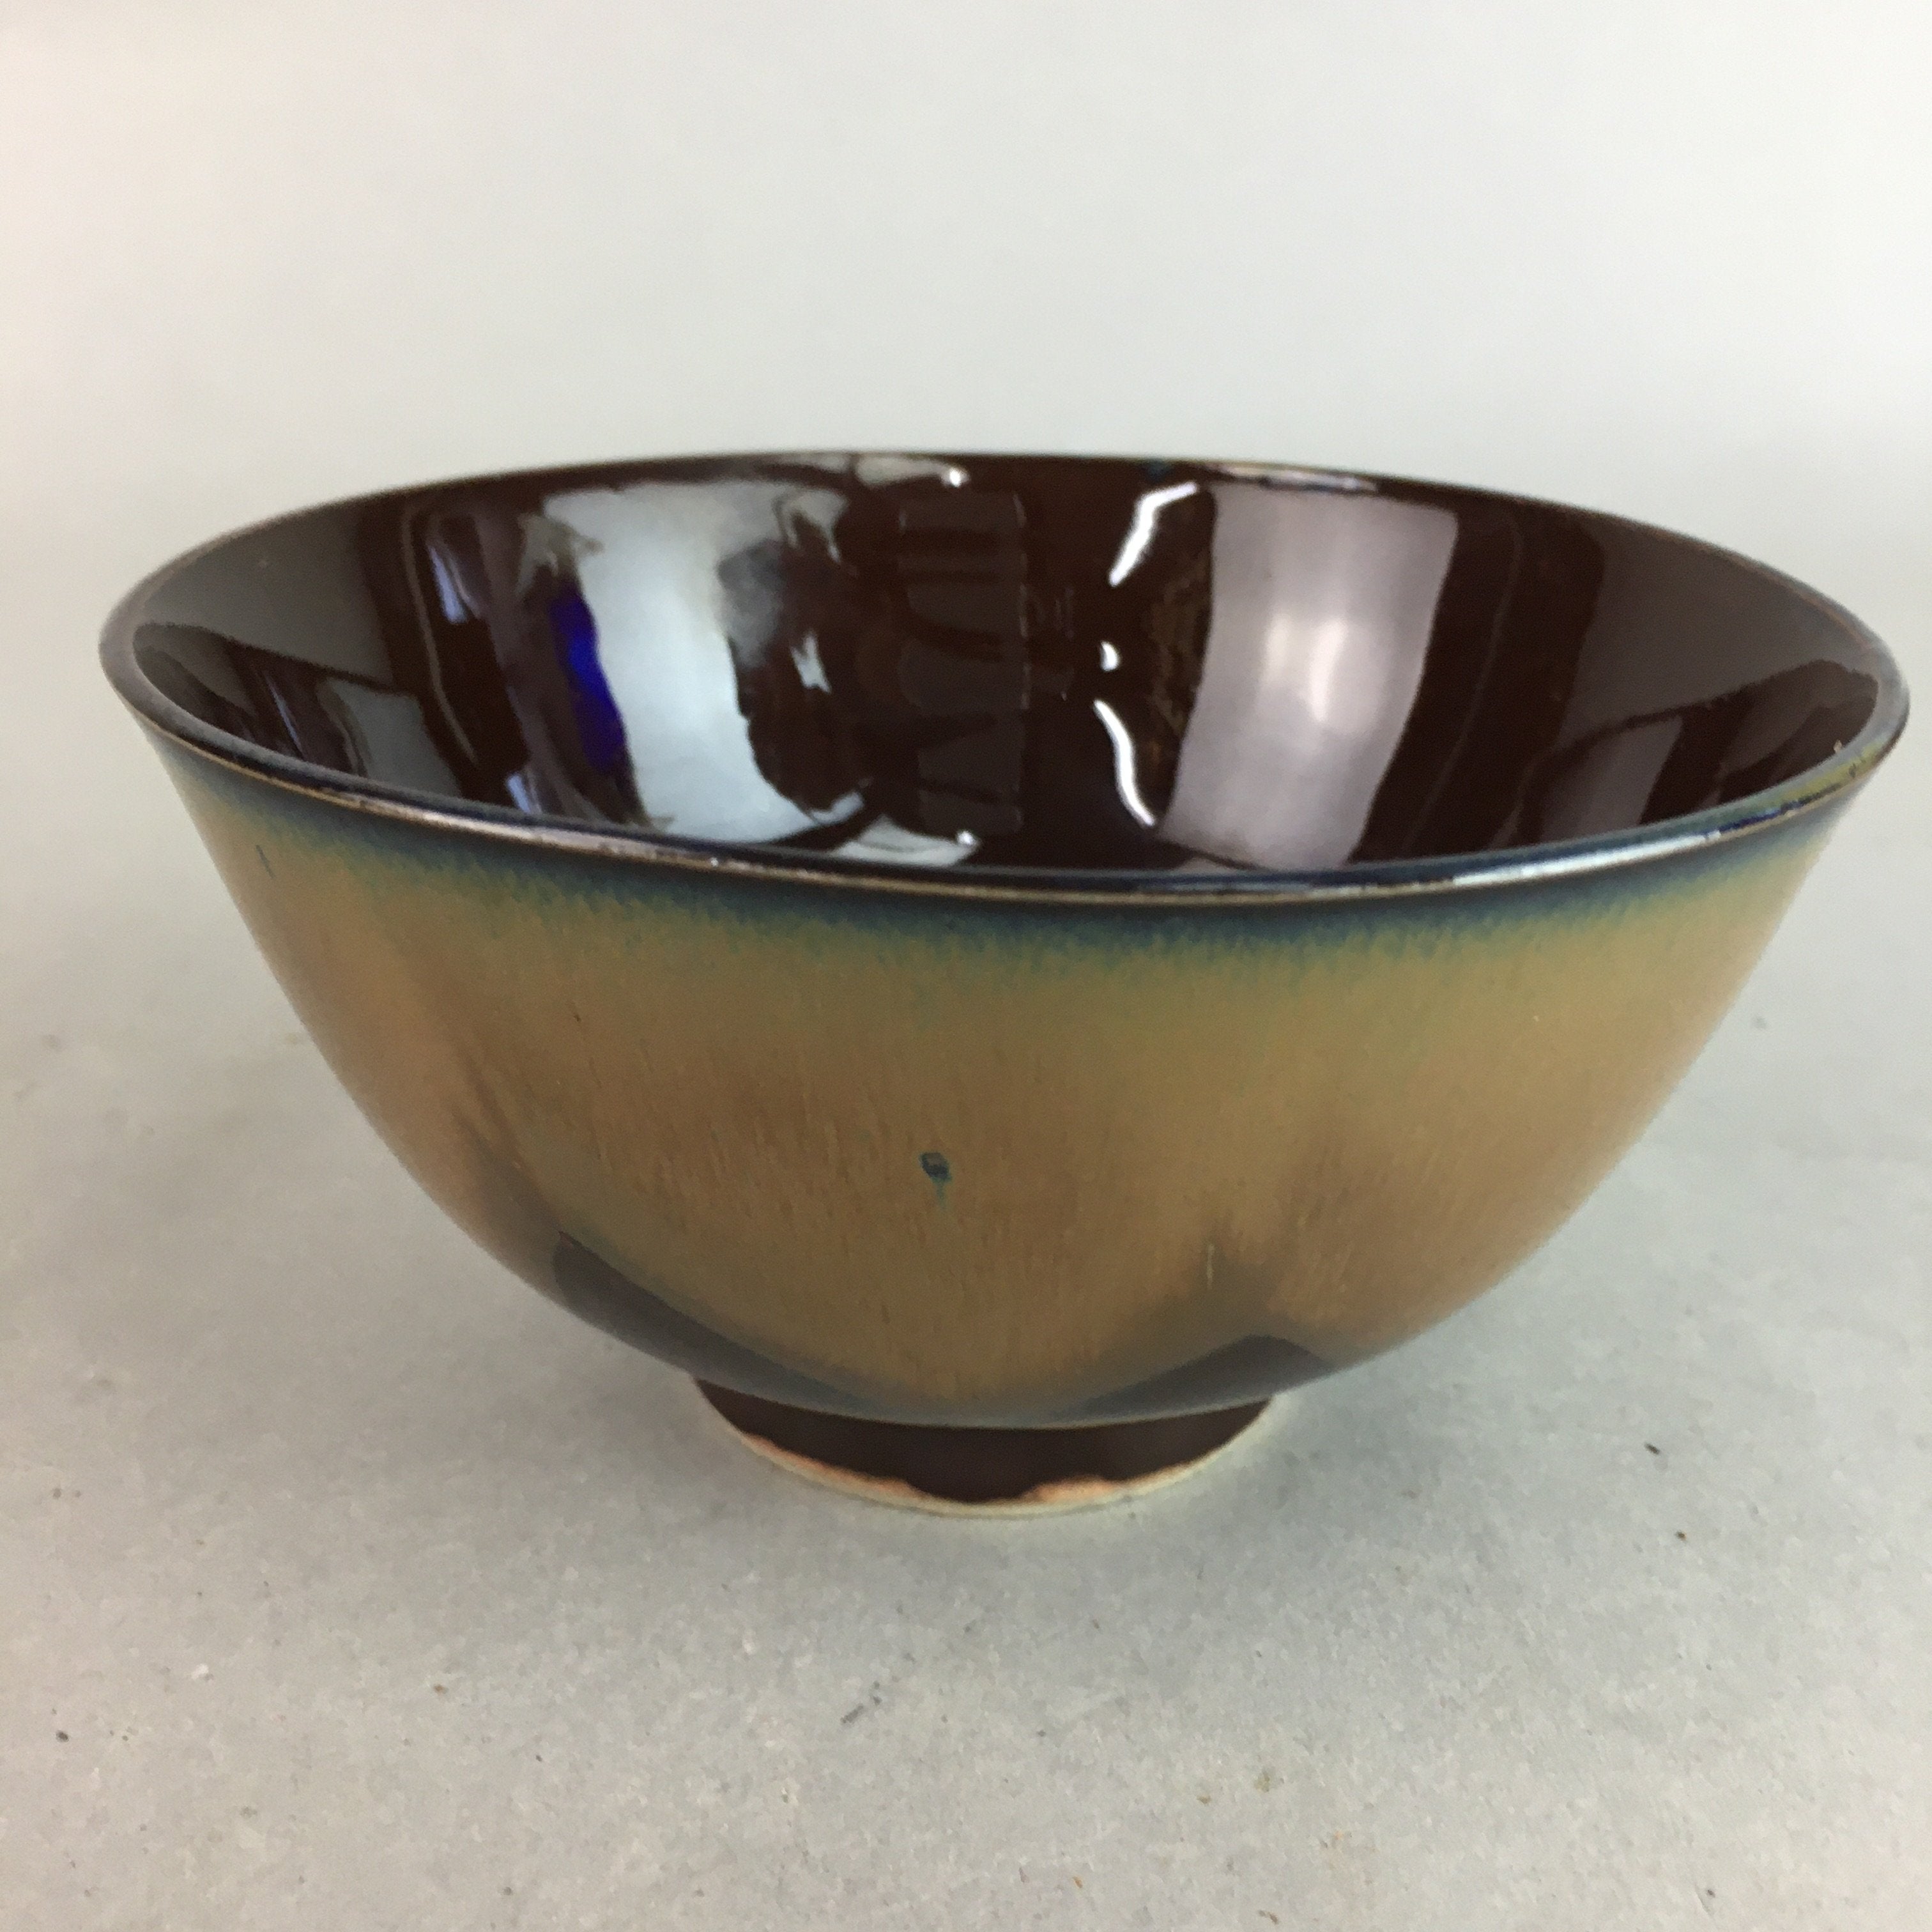 Japanese Porcelain Rice Bowl Vtg Chawan Brown Shiny Smooth Flowing Glaze PP294